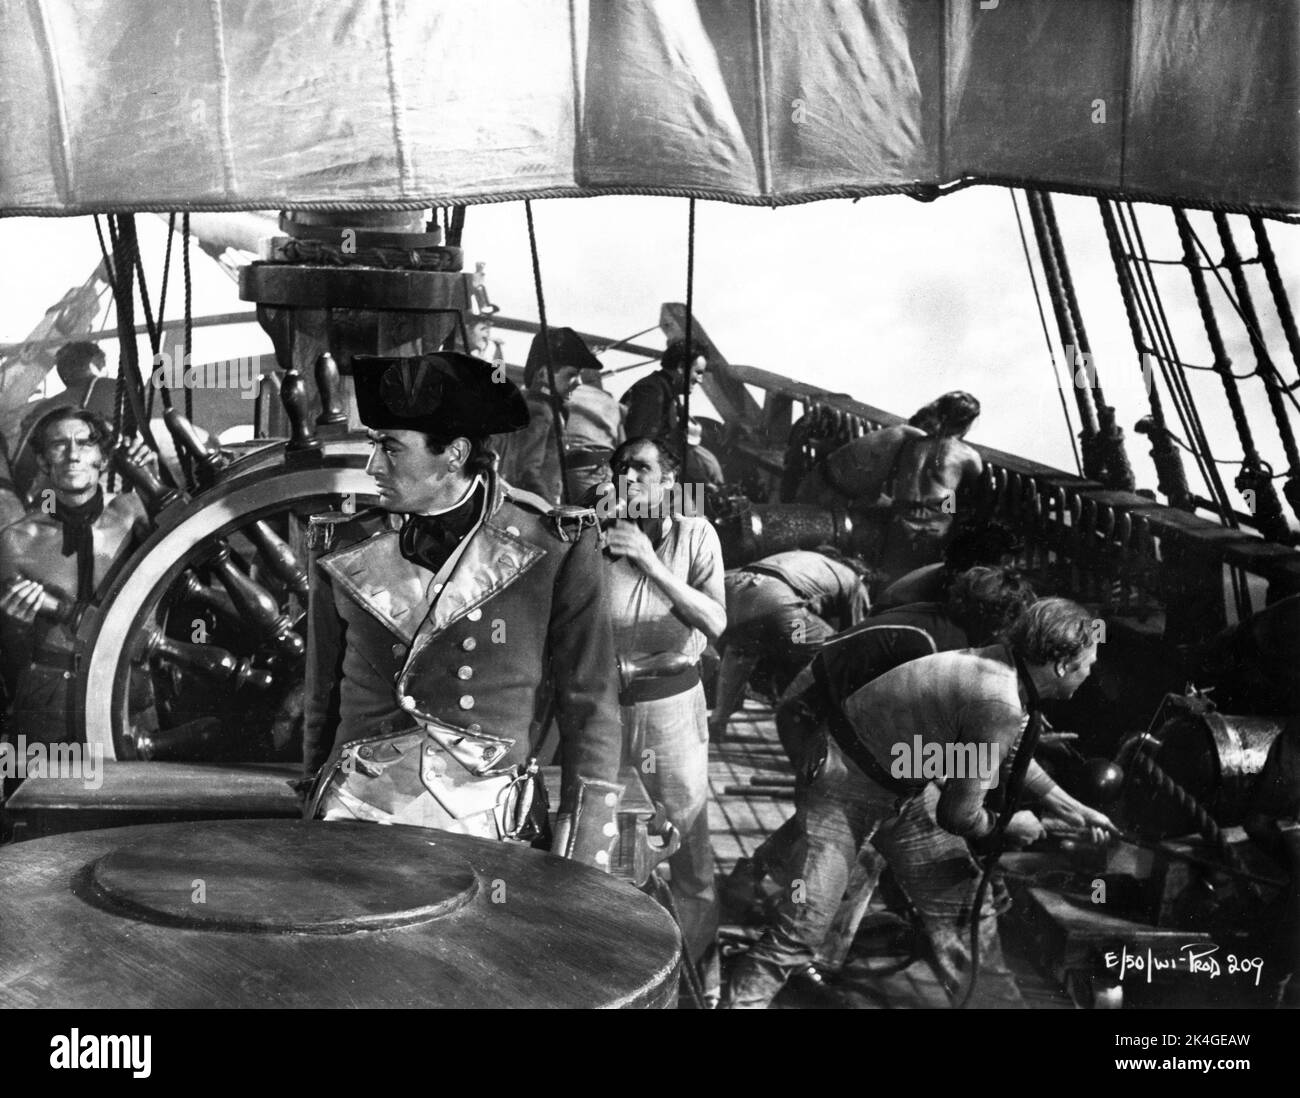 GREGORY PECK on deck during sea battle in CAPTAIN HORATIO HORNBLOWER R.N. 1951 director RAOUL WALSH novel / adaptation C.S. Forester music Robert Farnon UK-USA-France co-production Warner Bros. Stock Photo